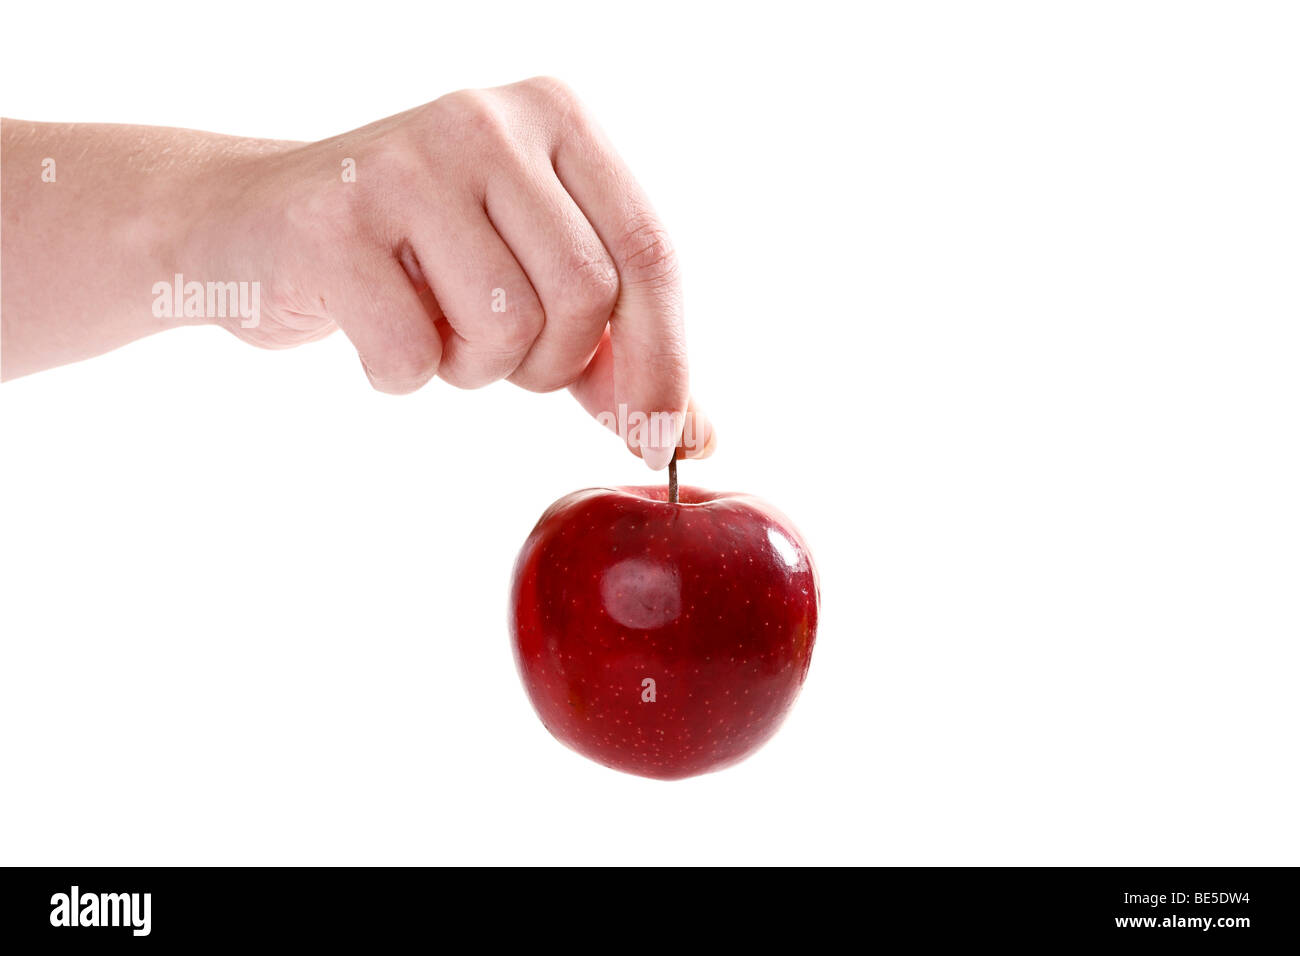 Hand holding a red apple Stock Photo